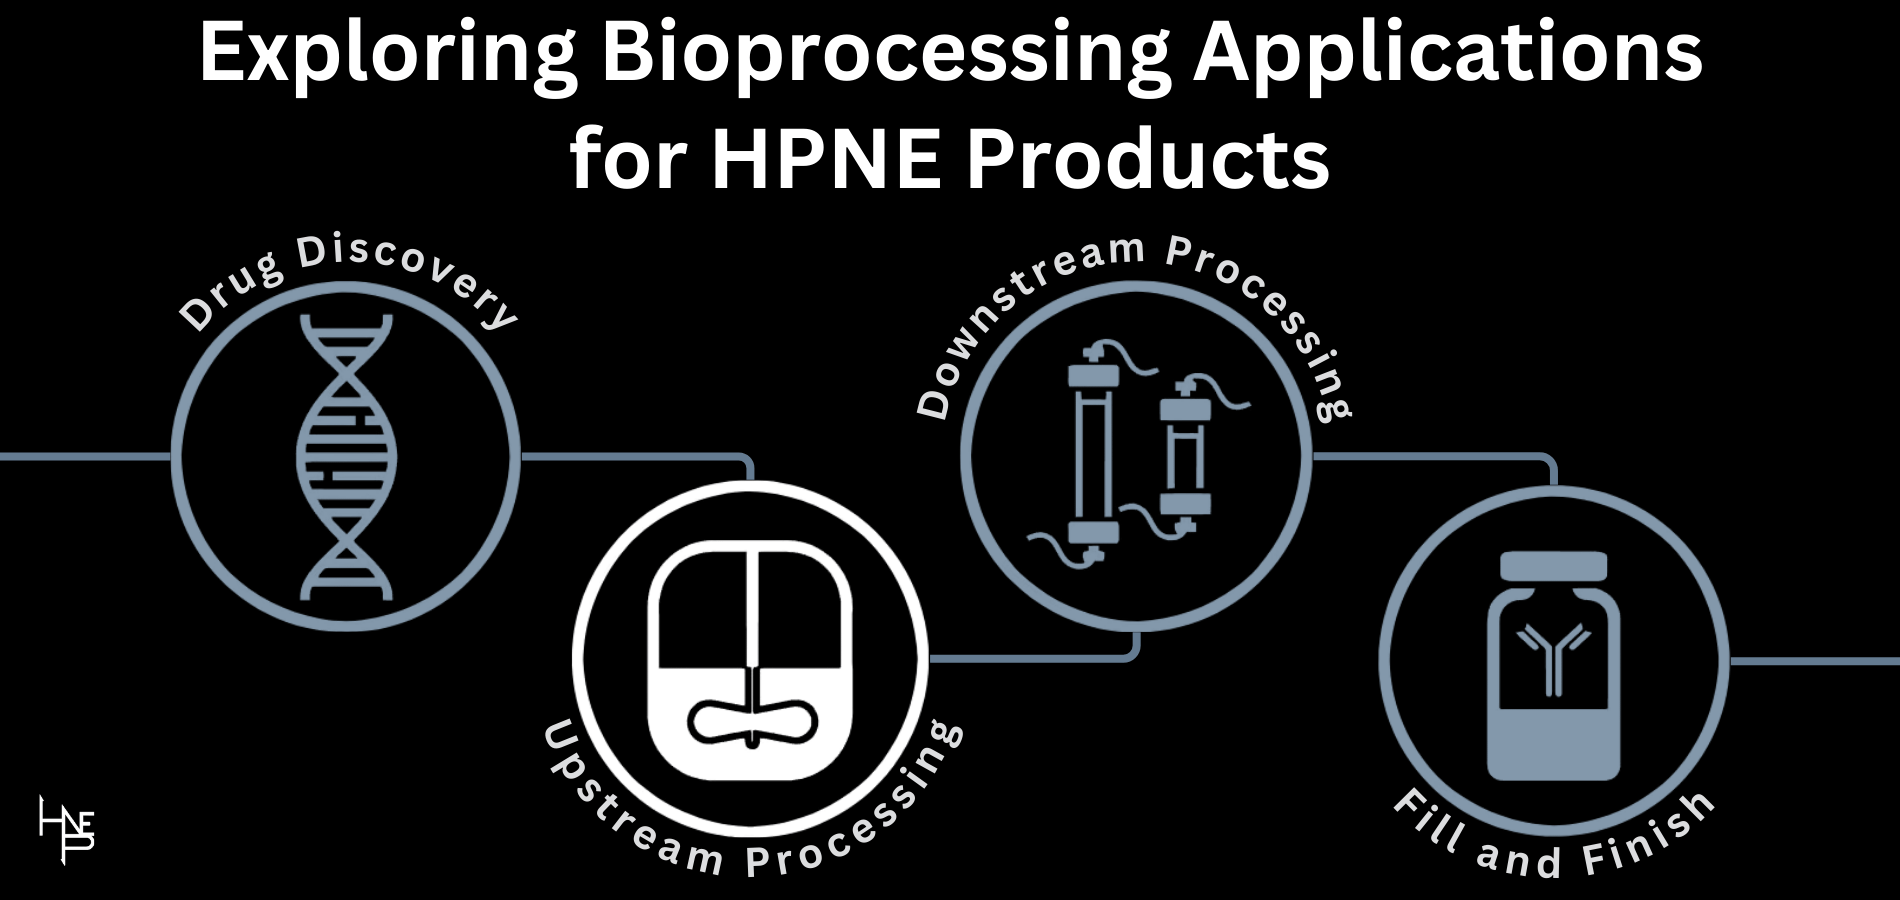 What is Upstream Bioprocessing?